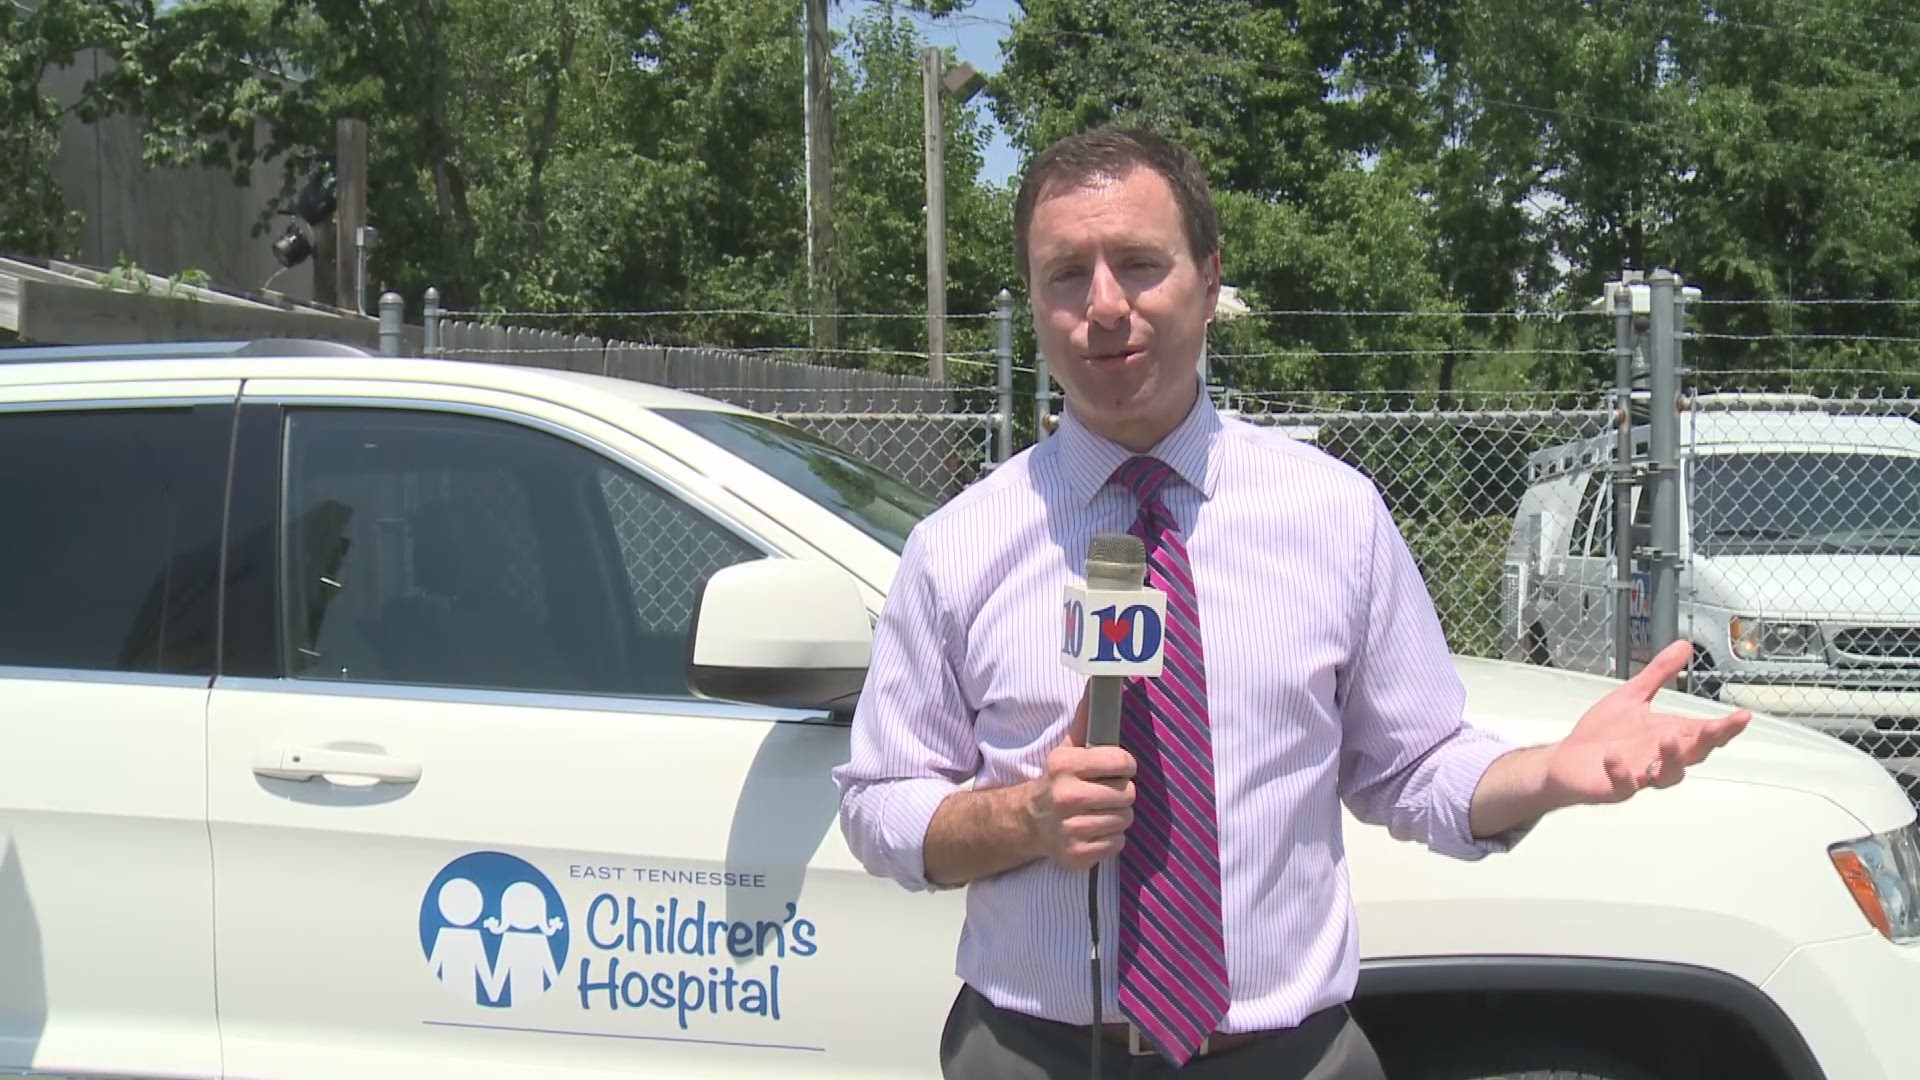 Watch as we track how hot it gets inside a locked vehicle, and how dangerous that can be for children or pets.